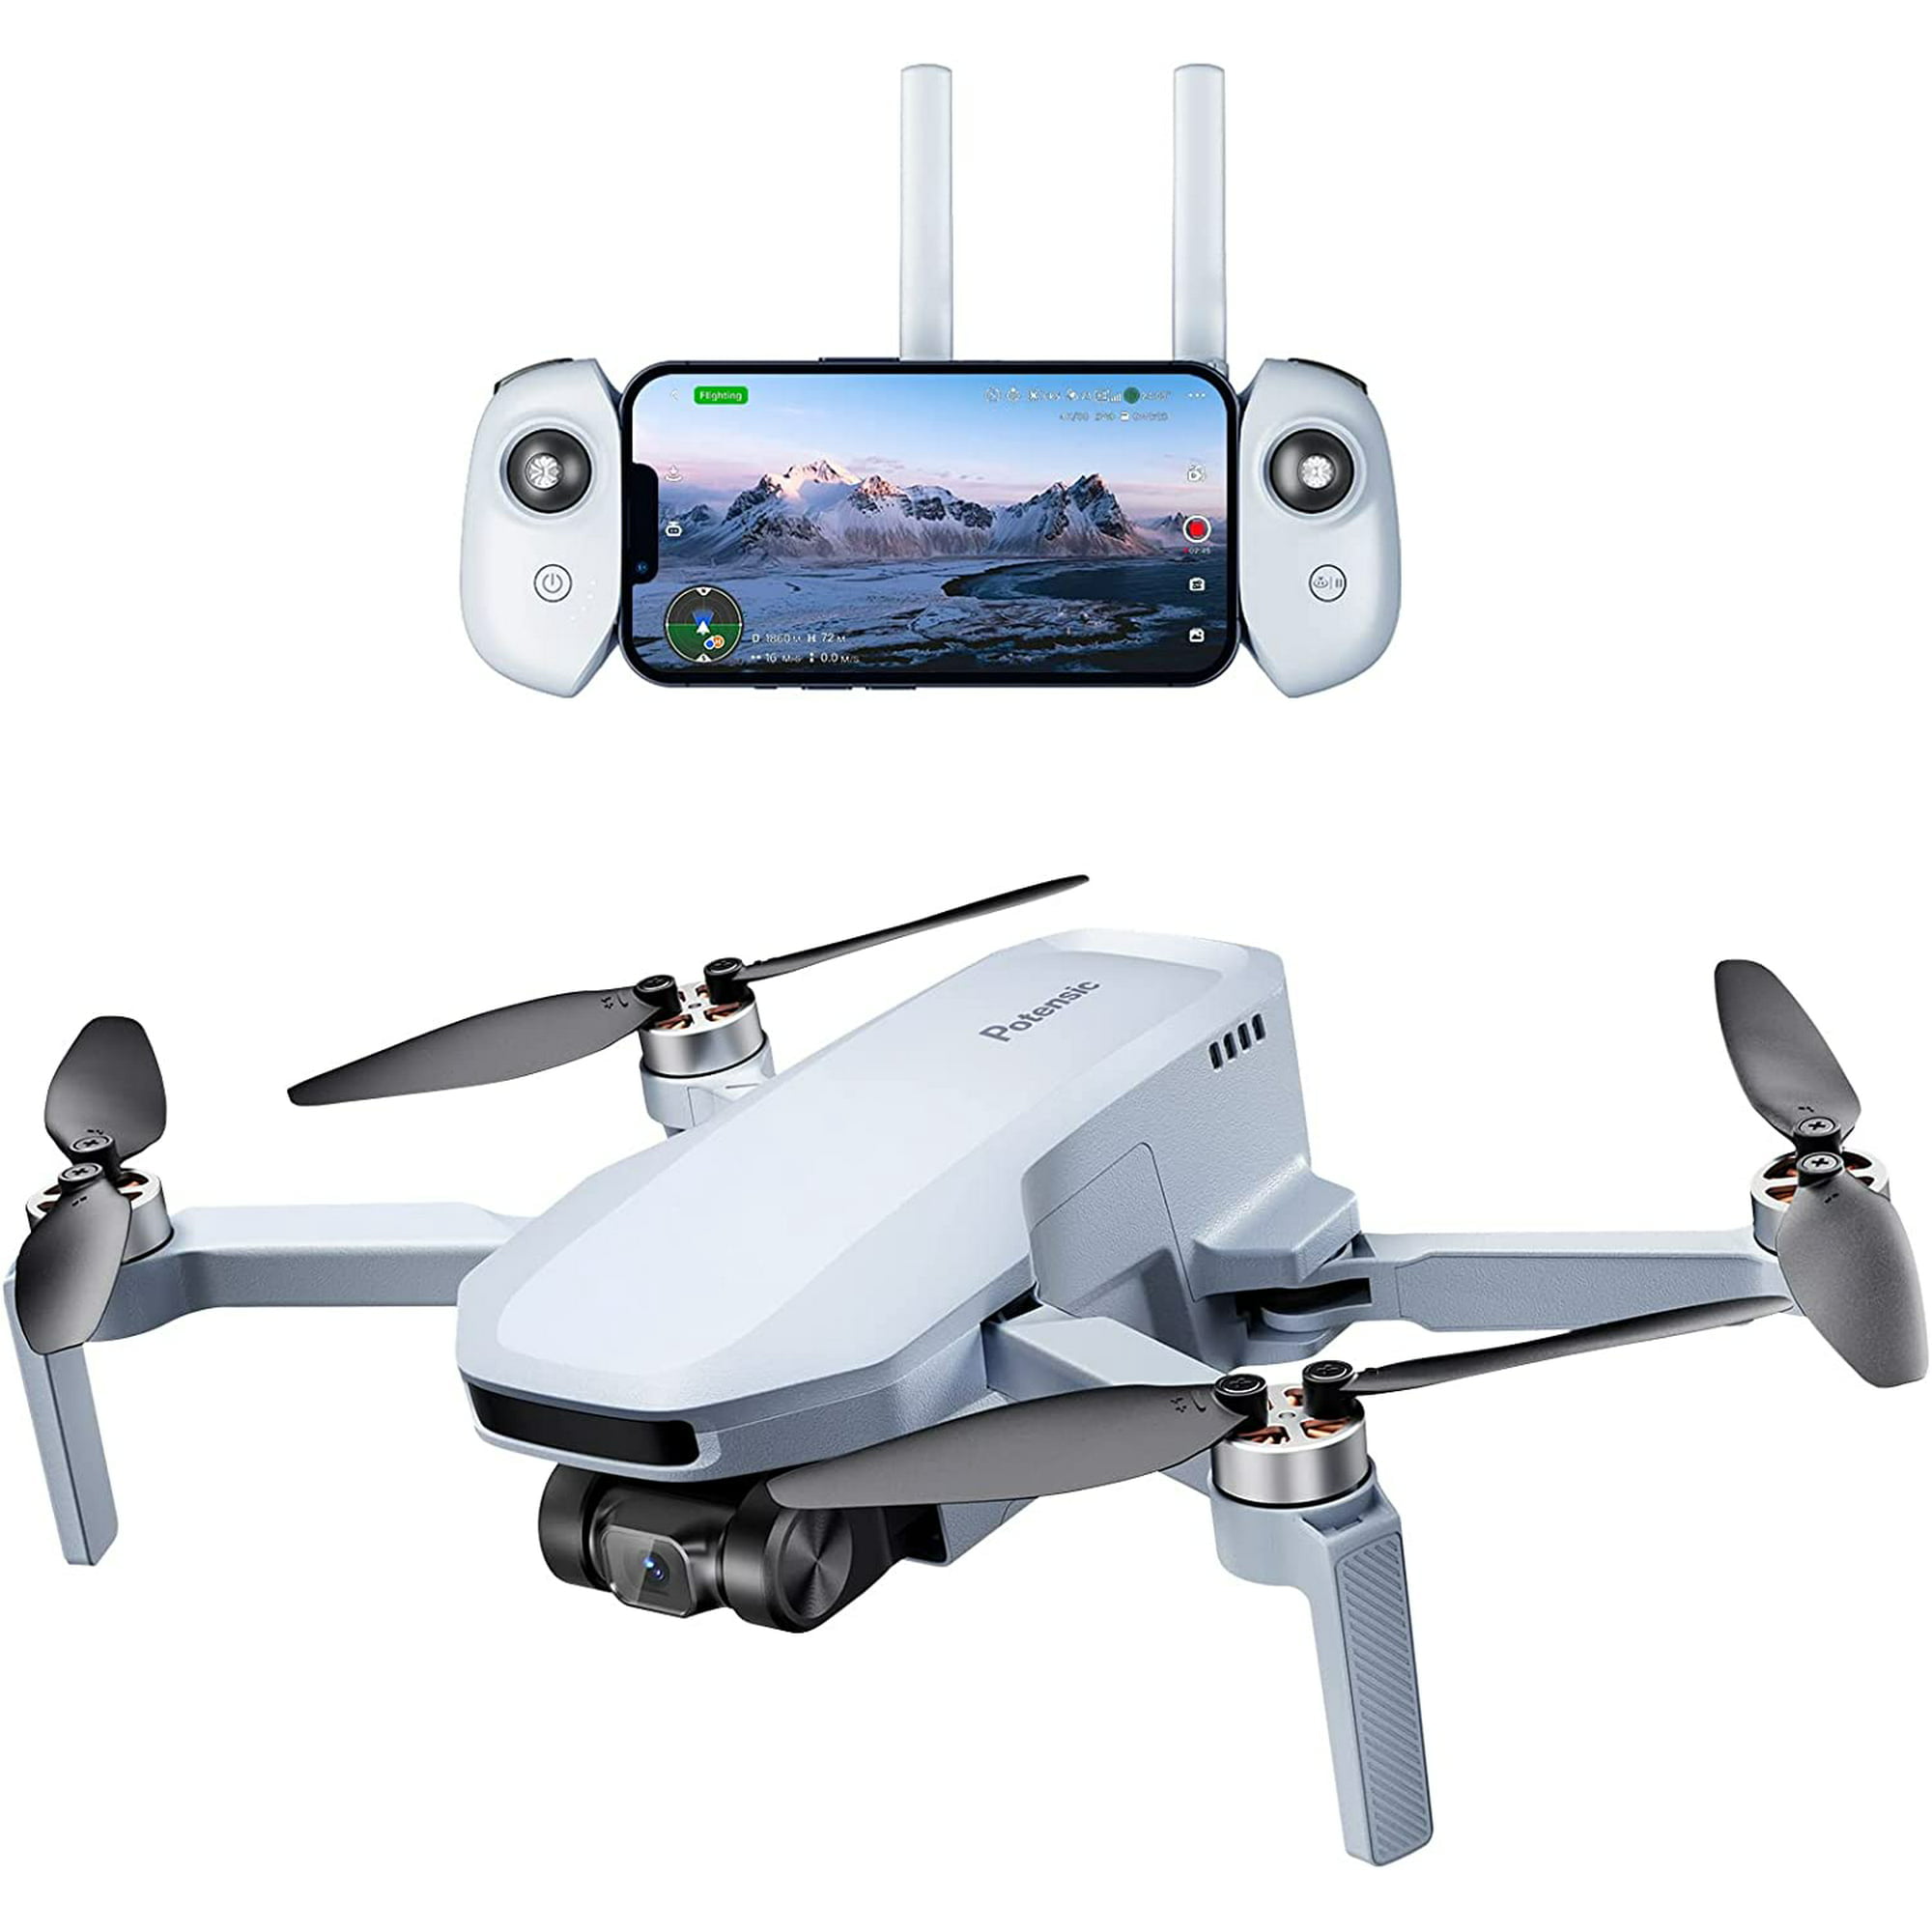 Potensic - #NEWARRIVAL 🆕Potensic #Brushless Drone D85 is available now.  📣🆒 Detachable 1080P HD Action cam, 130°FOV 5G WiFi Transmission, 4900FT  Dual GPS, 2800mAh battery. Grab yours here➡️